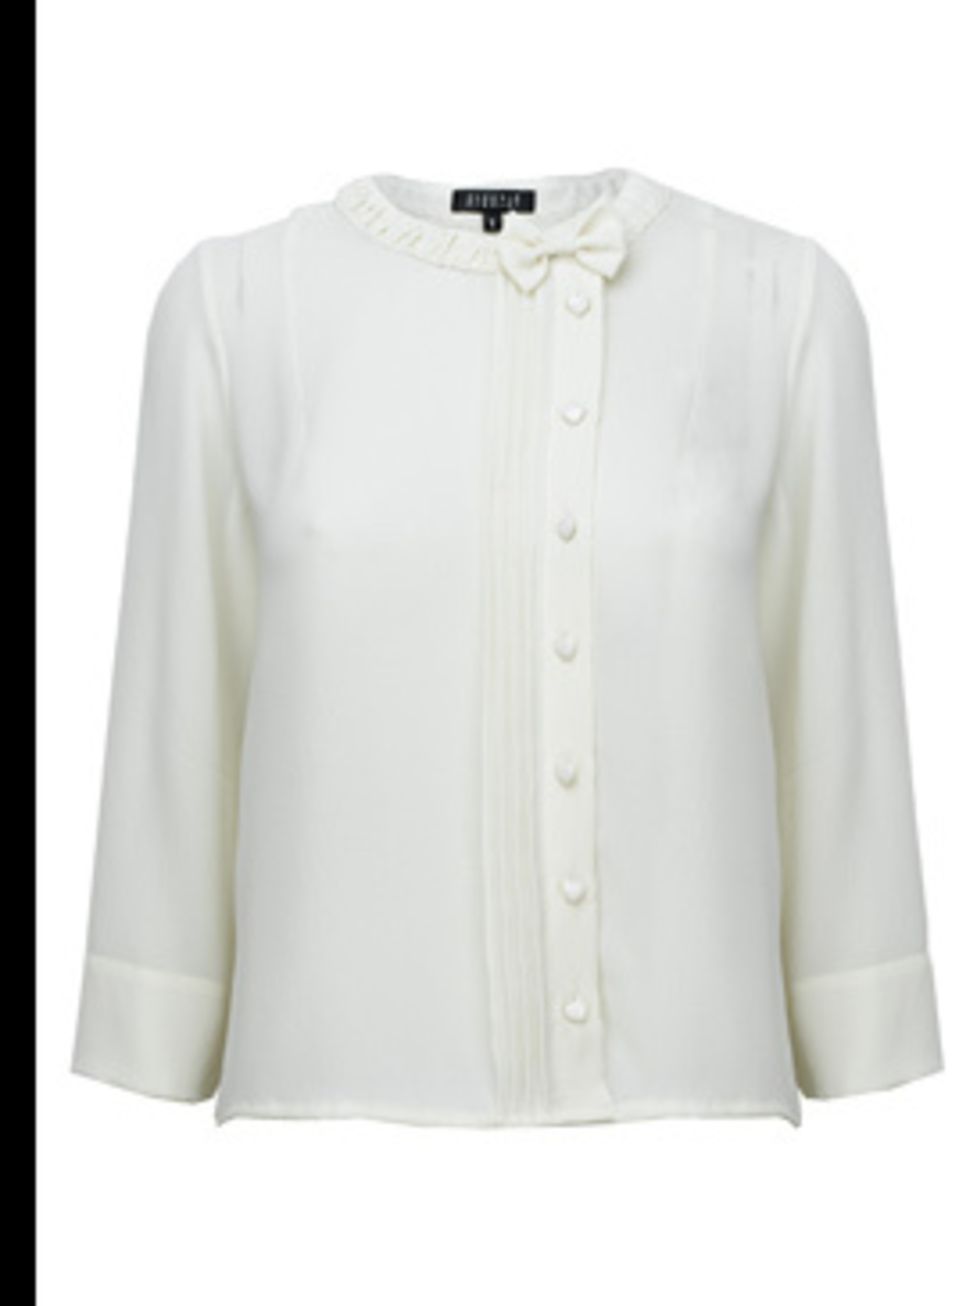 <p>Blouse, £129.00 by Claudie Pierlot. For stockists call Fenwicks on 0207 629 9161</p>